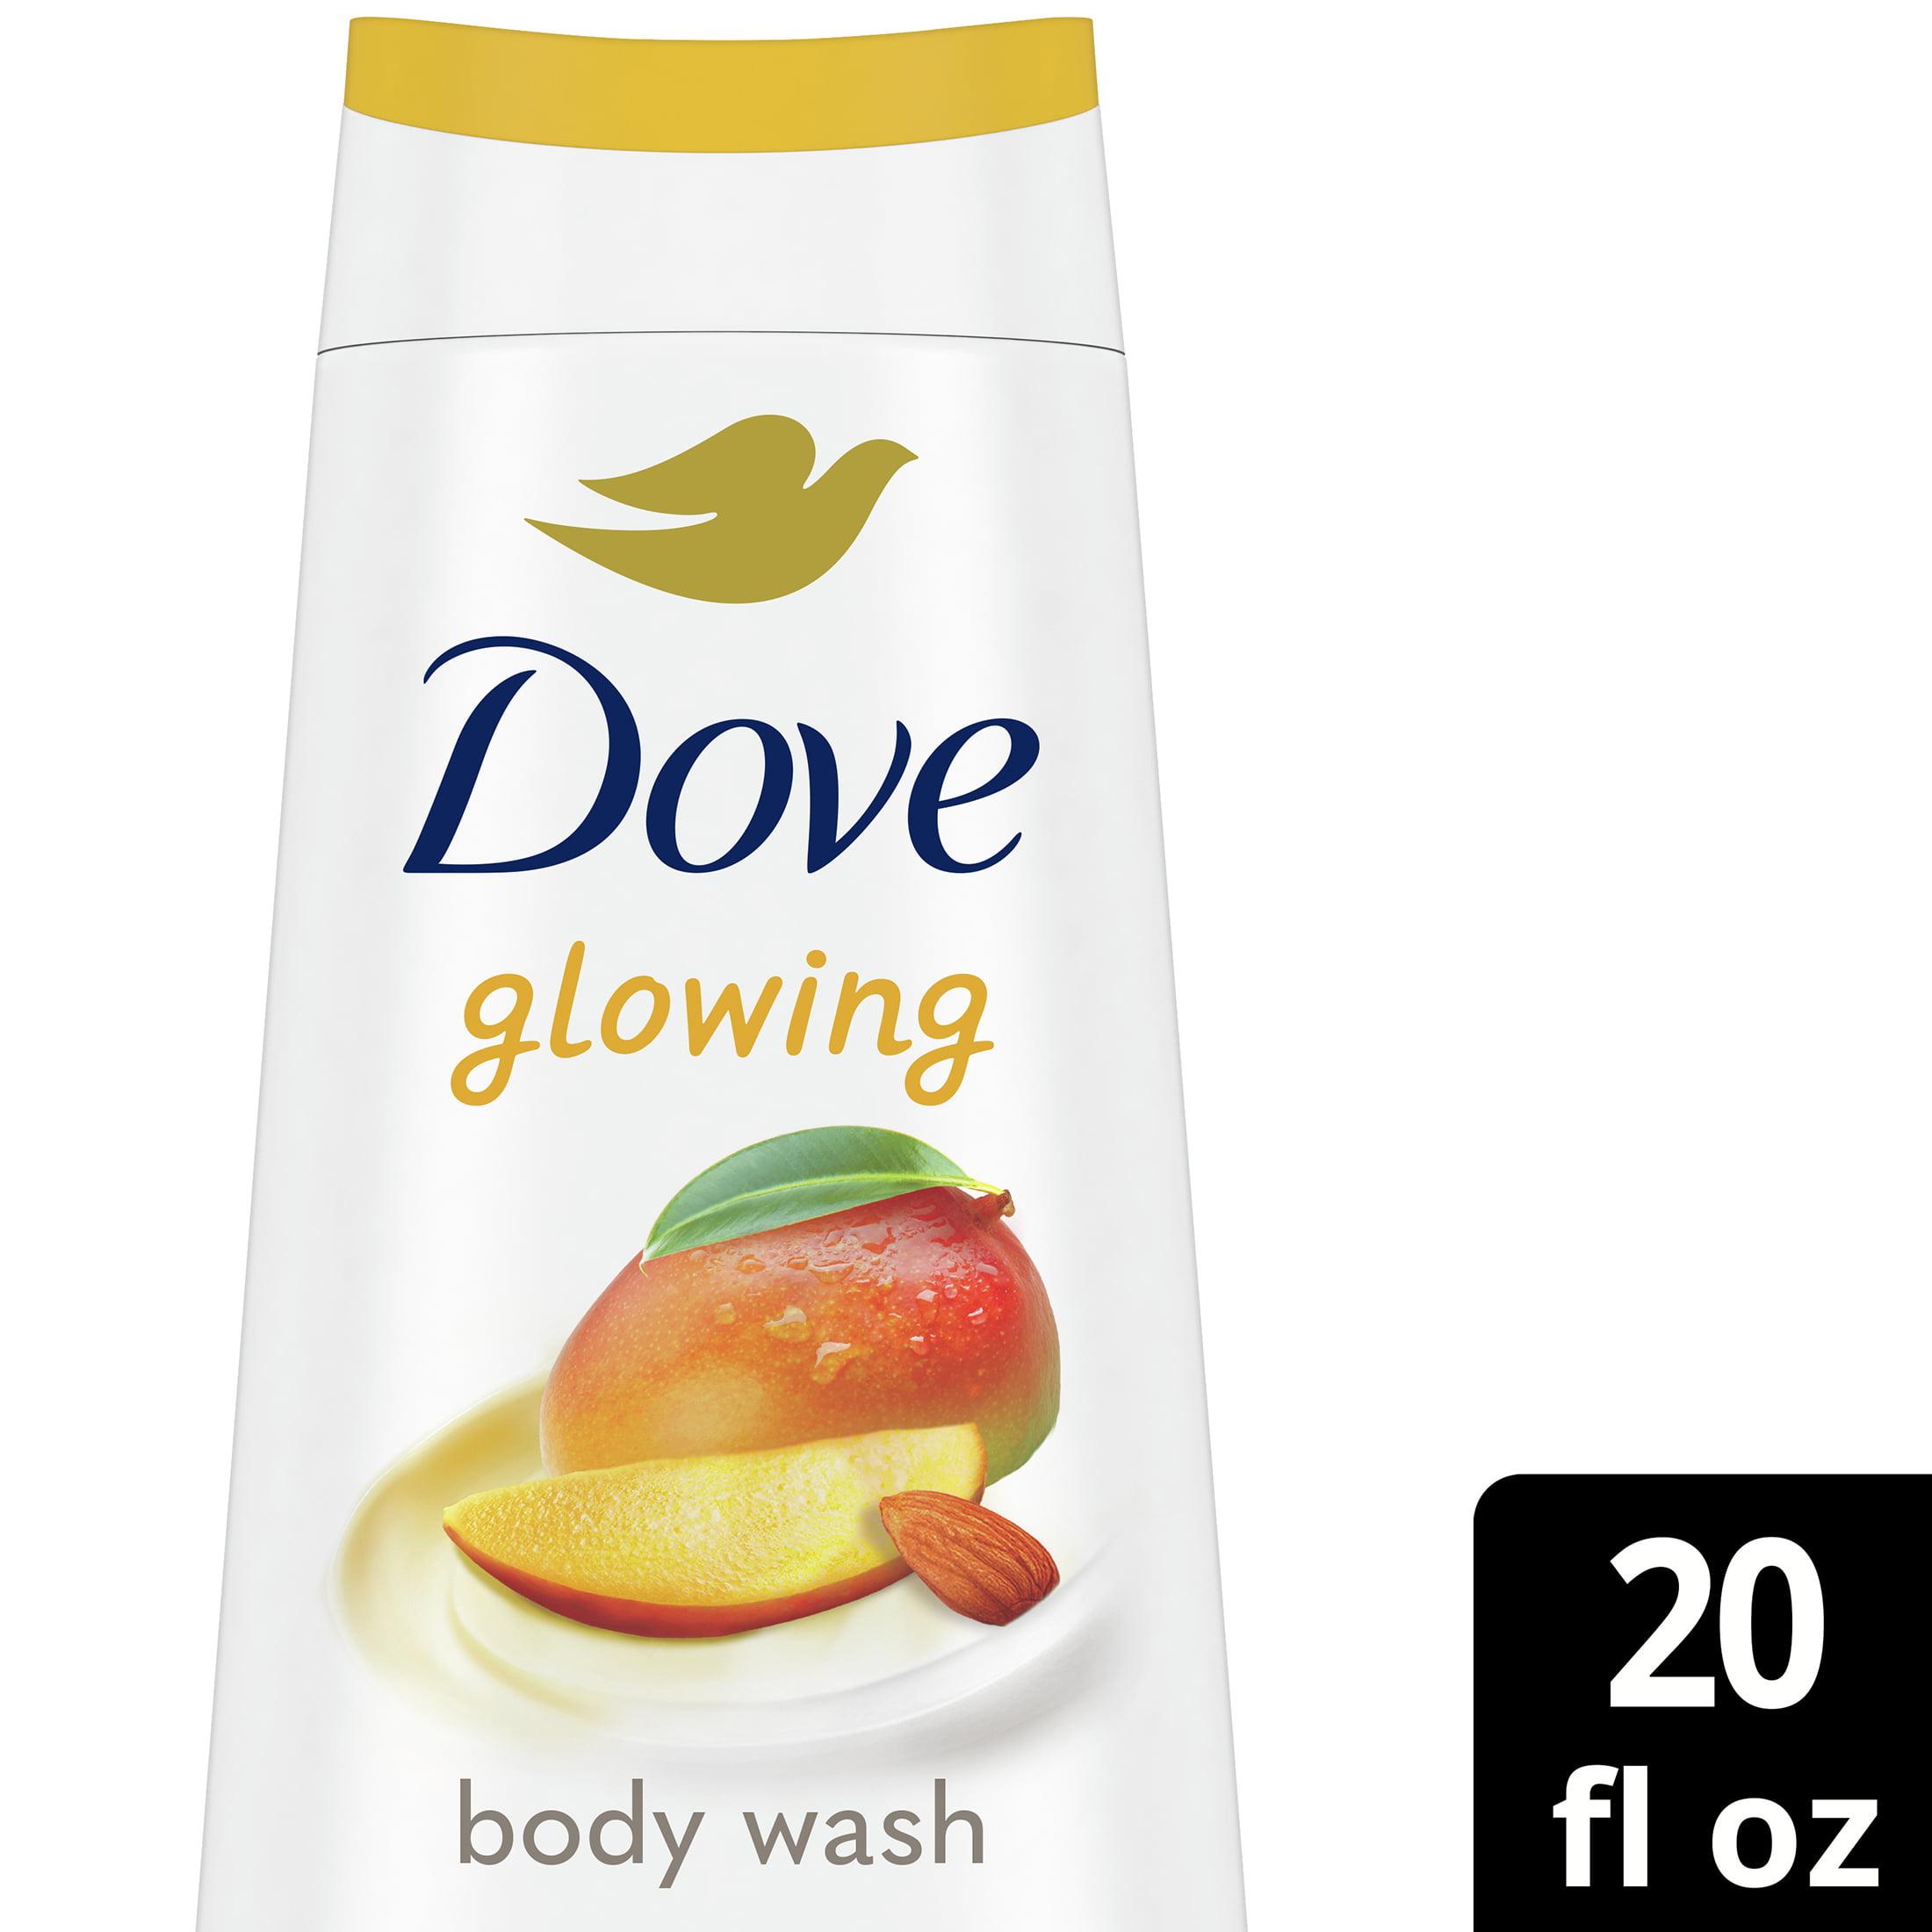 Dove Glowing Long Lasting Gentle Women's Body Wash All Skin Type, Mango and Almond Butter, 20 fl oz - image 3 of 11